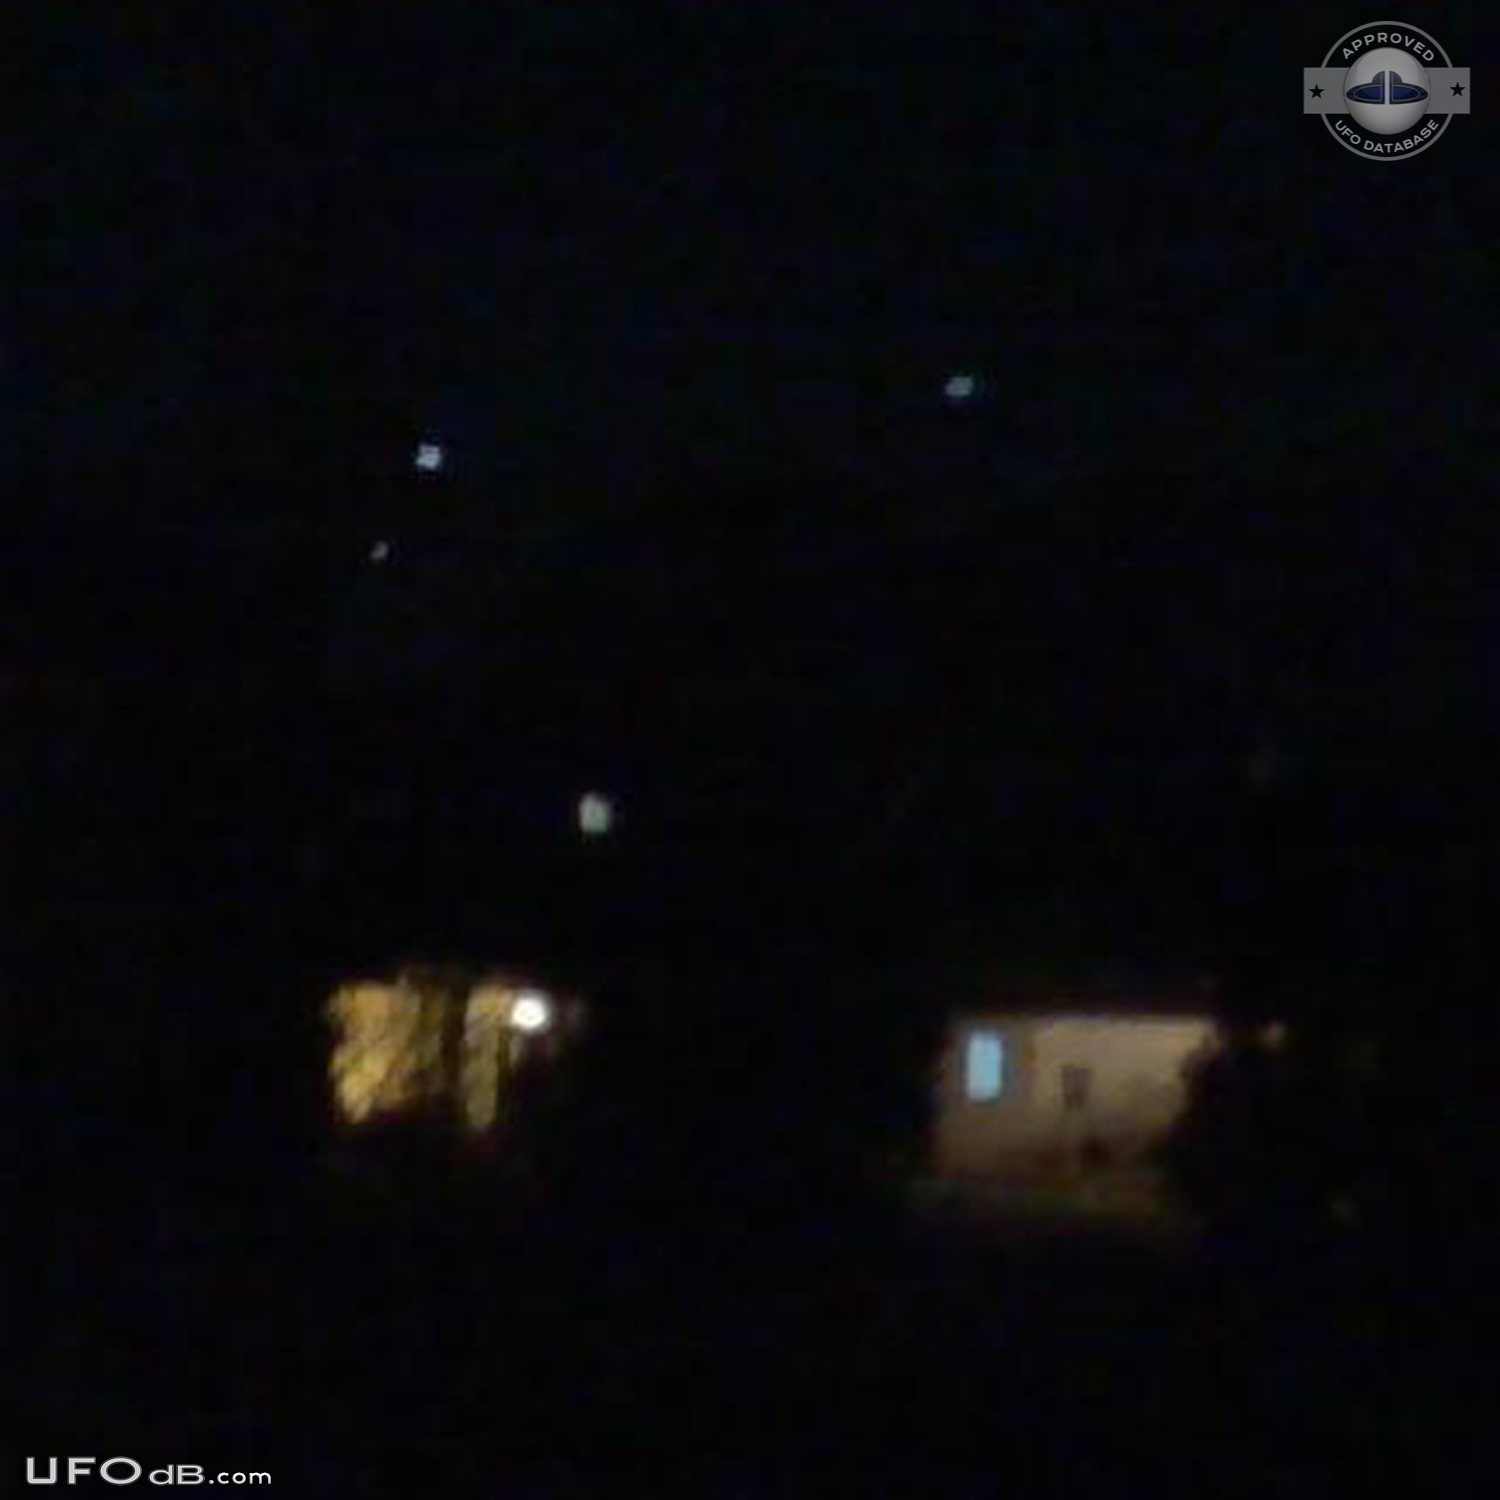 At least 20 UFOs flying near each other very bright & fast Westland MI UFO Picture #548-4